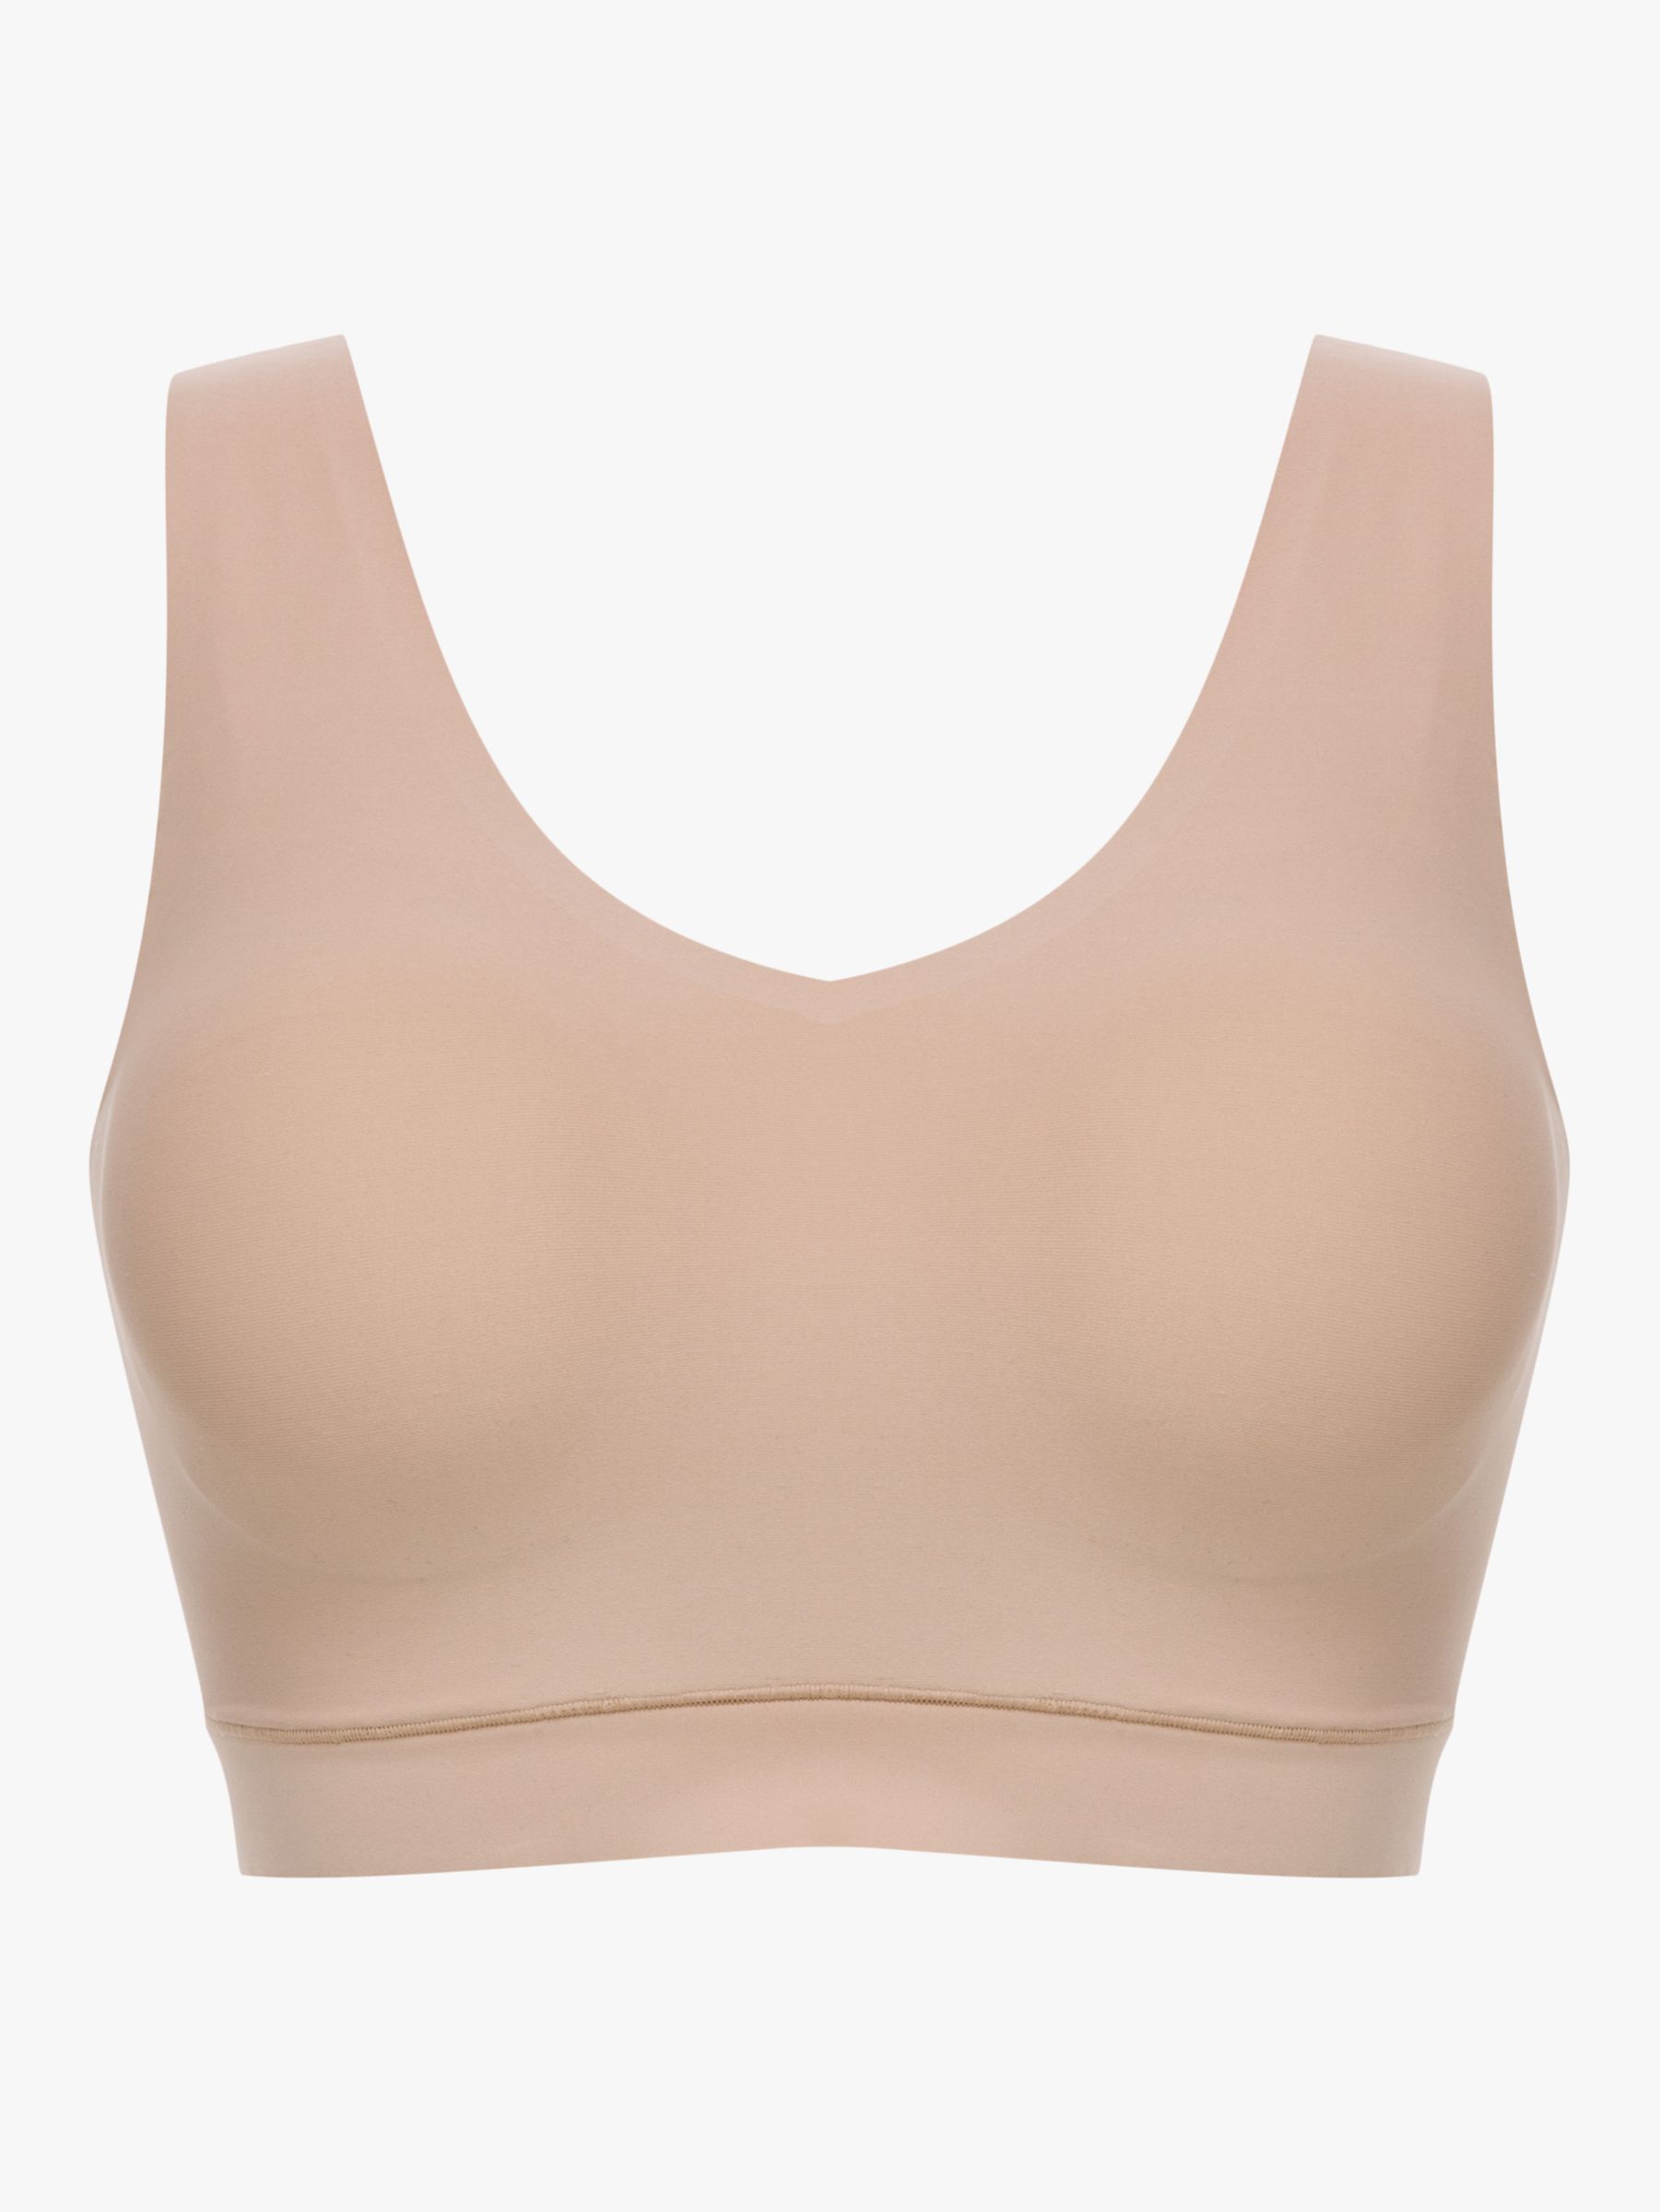 Chantelle Soft Stretch Padded V-Neck Crop Top Lounge Bra in Nude